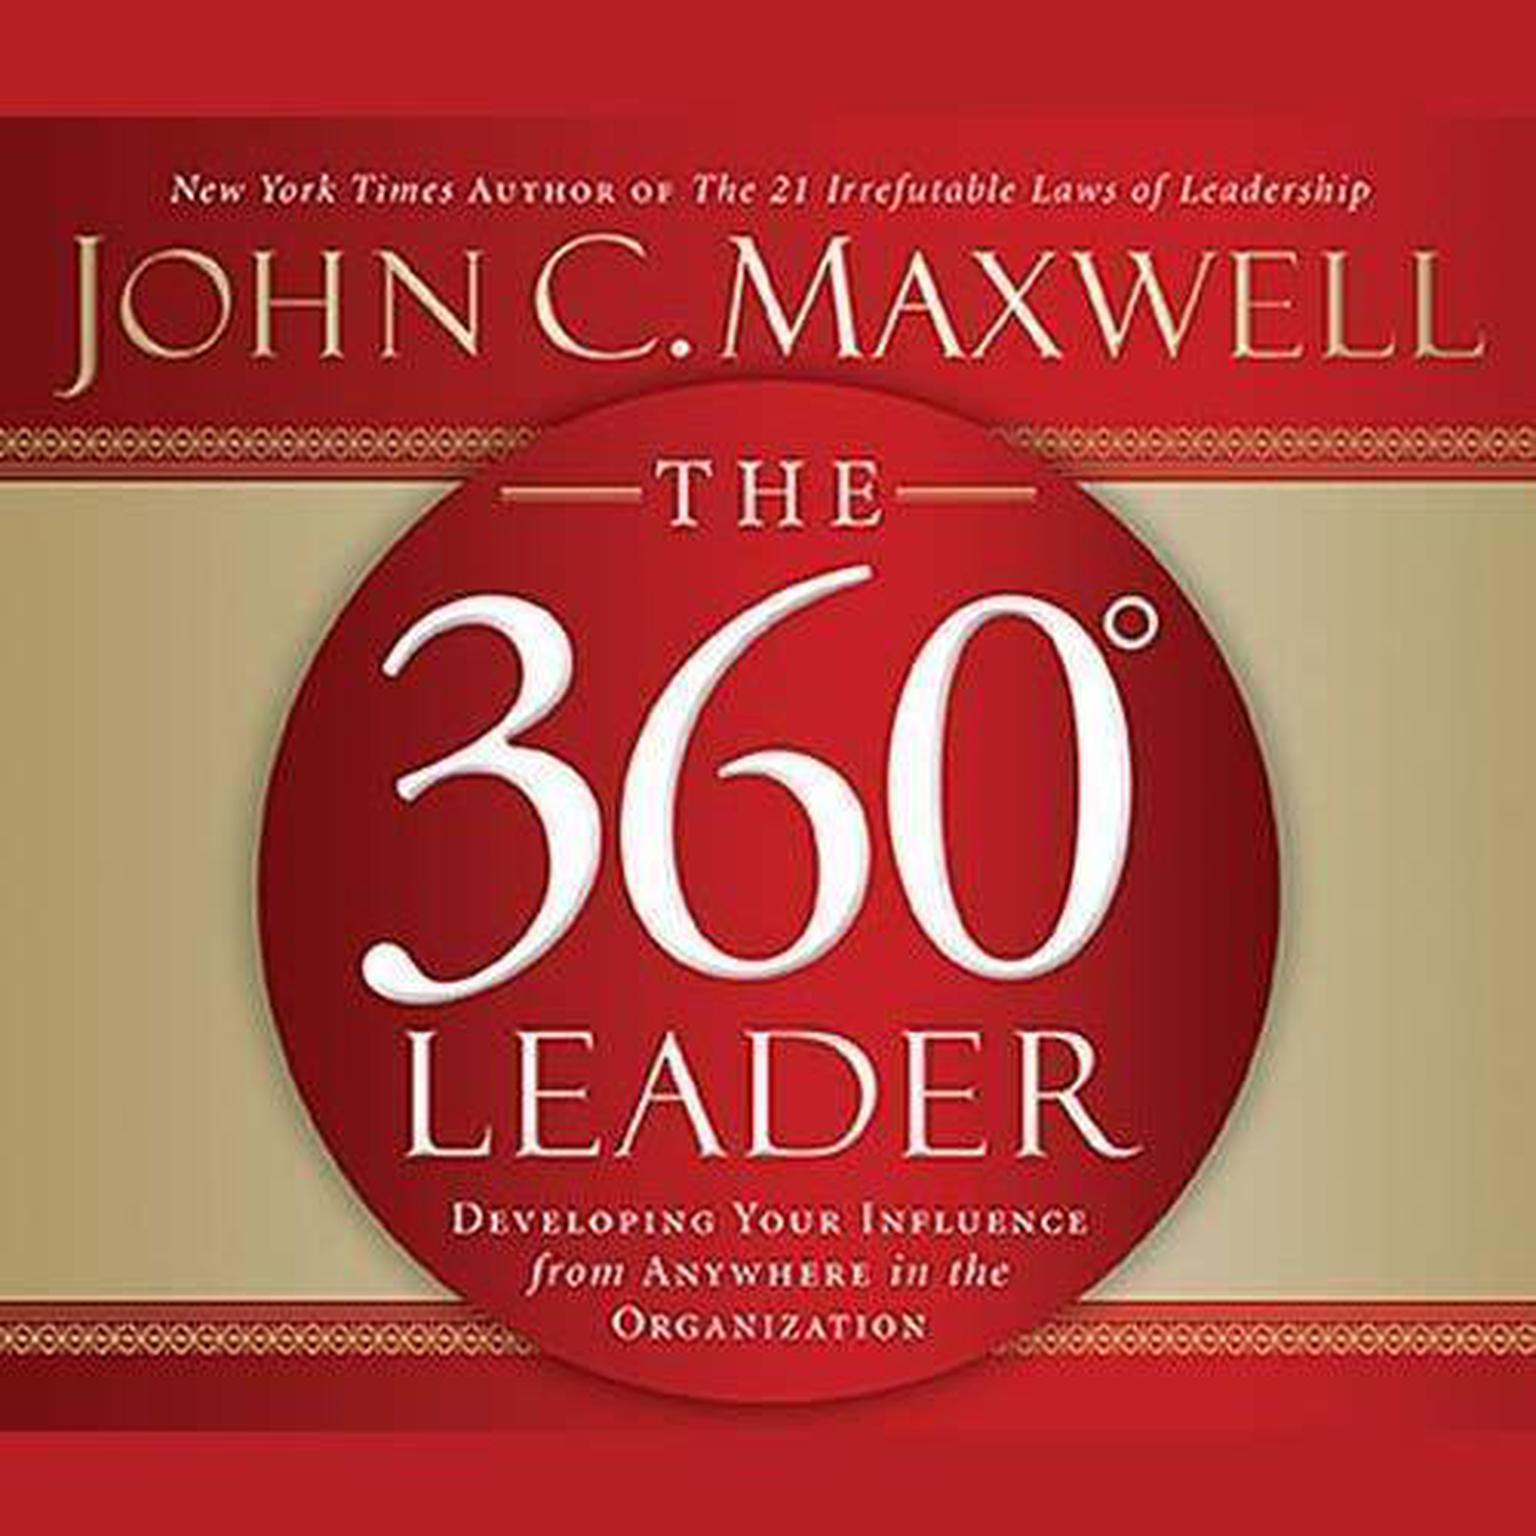 The 360 Degree Leader (Abridged): Developing Your Influence from Anywhere in the Organization Audiobook, by John C. Maxwell